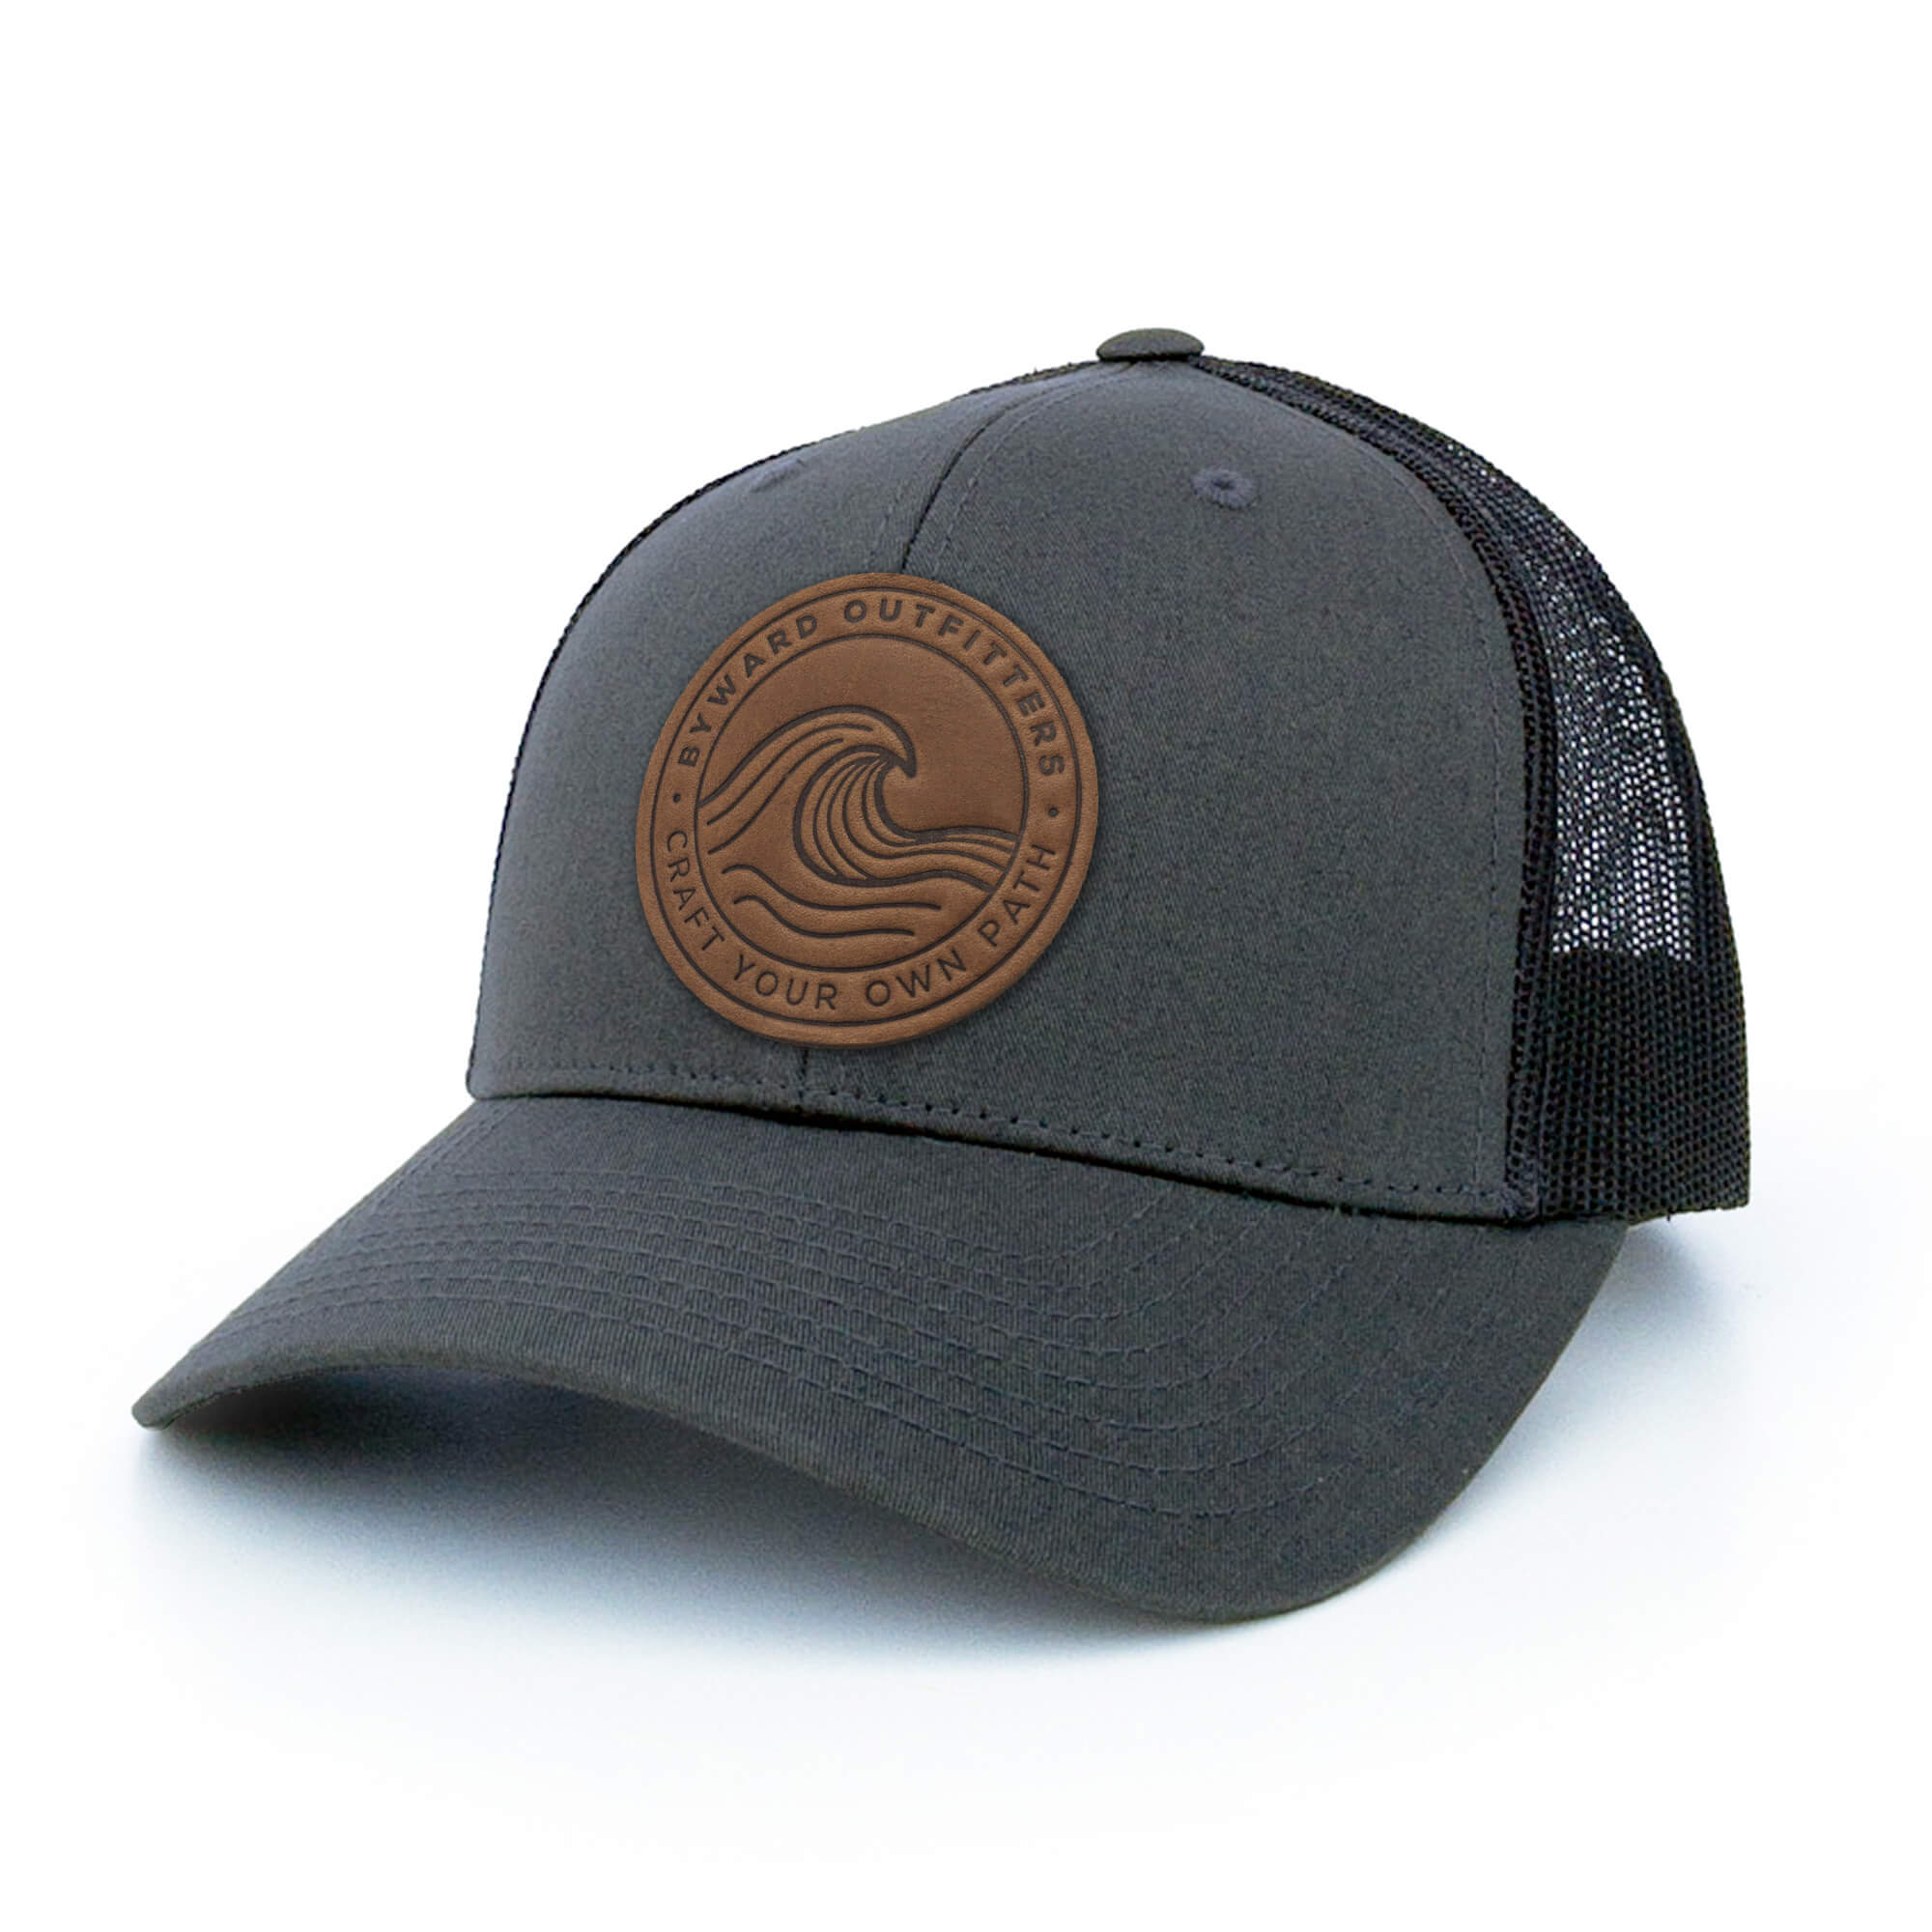 Charcoal trucker hat with full-grain leather patch of a Rolling Wave | BLACK-005-003, CHARC-005-003, NAVY-005-003, HGREY-005-003, MOSS-005-003, BROWN-005-003